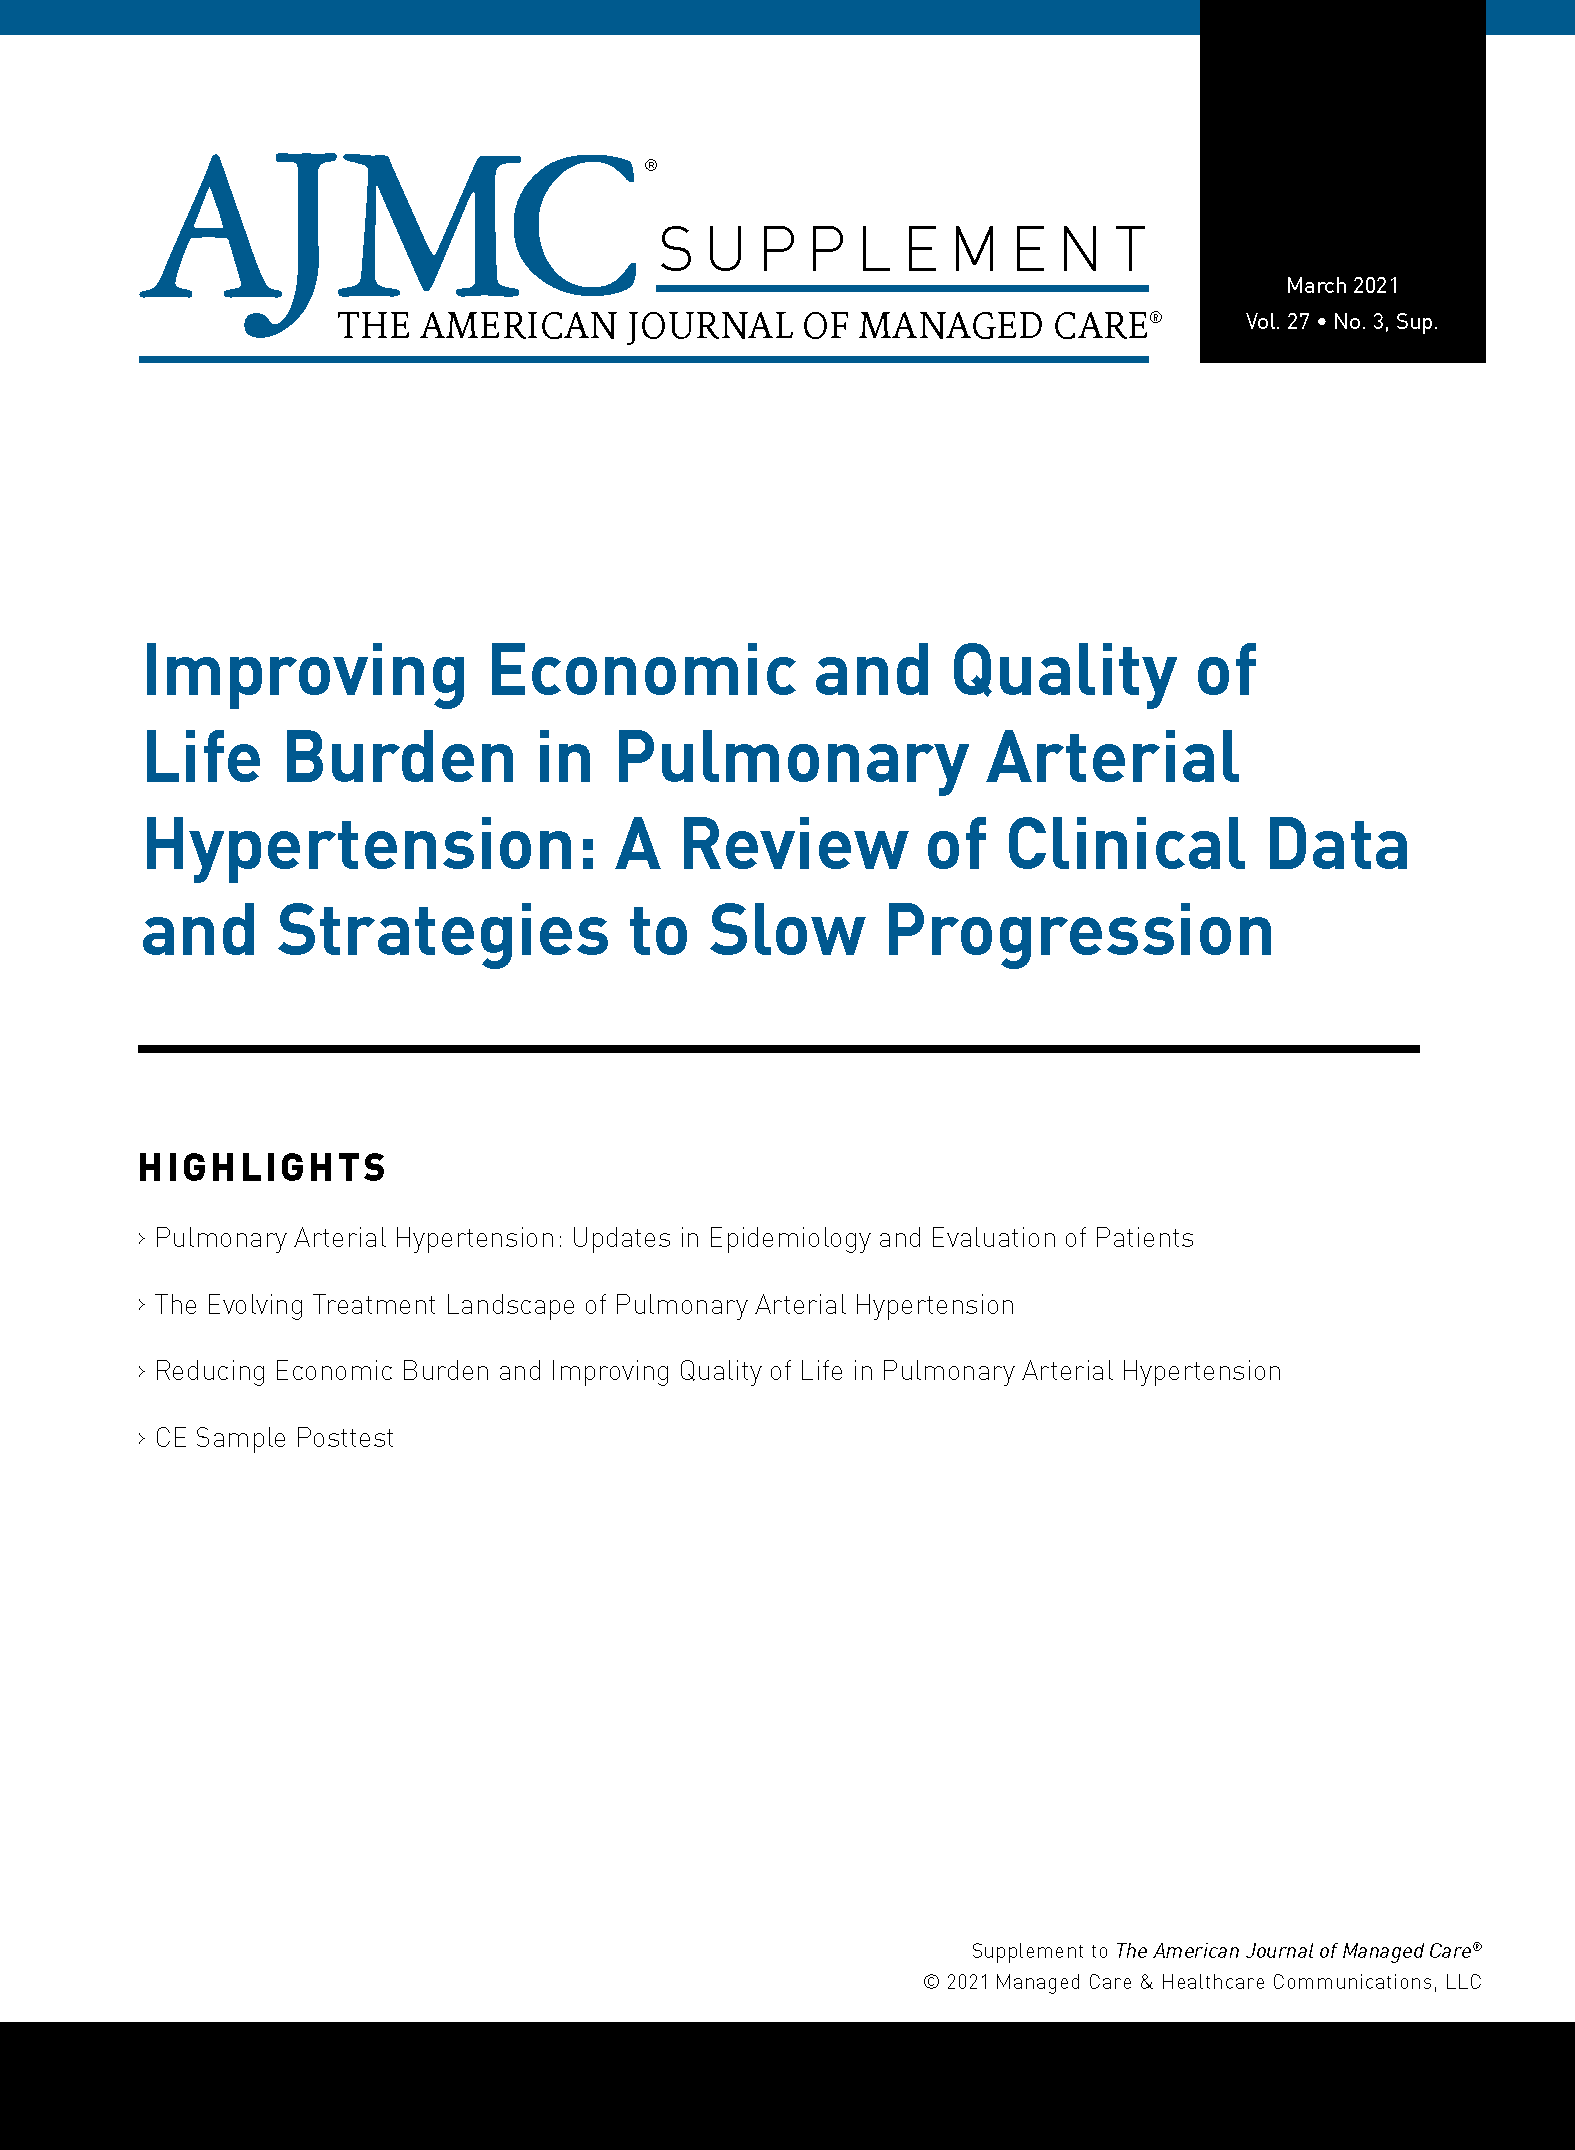 Improving Economic and Quality of Life Burden in Pulmonary Arterial Hypertension: A Review of Clinical Data and Strategies to Slow Progression